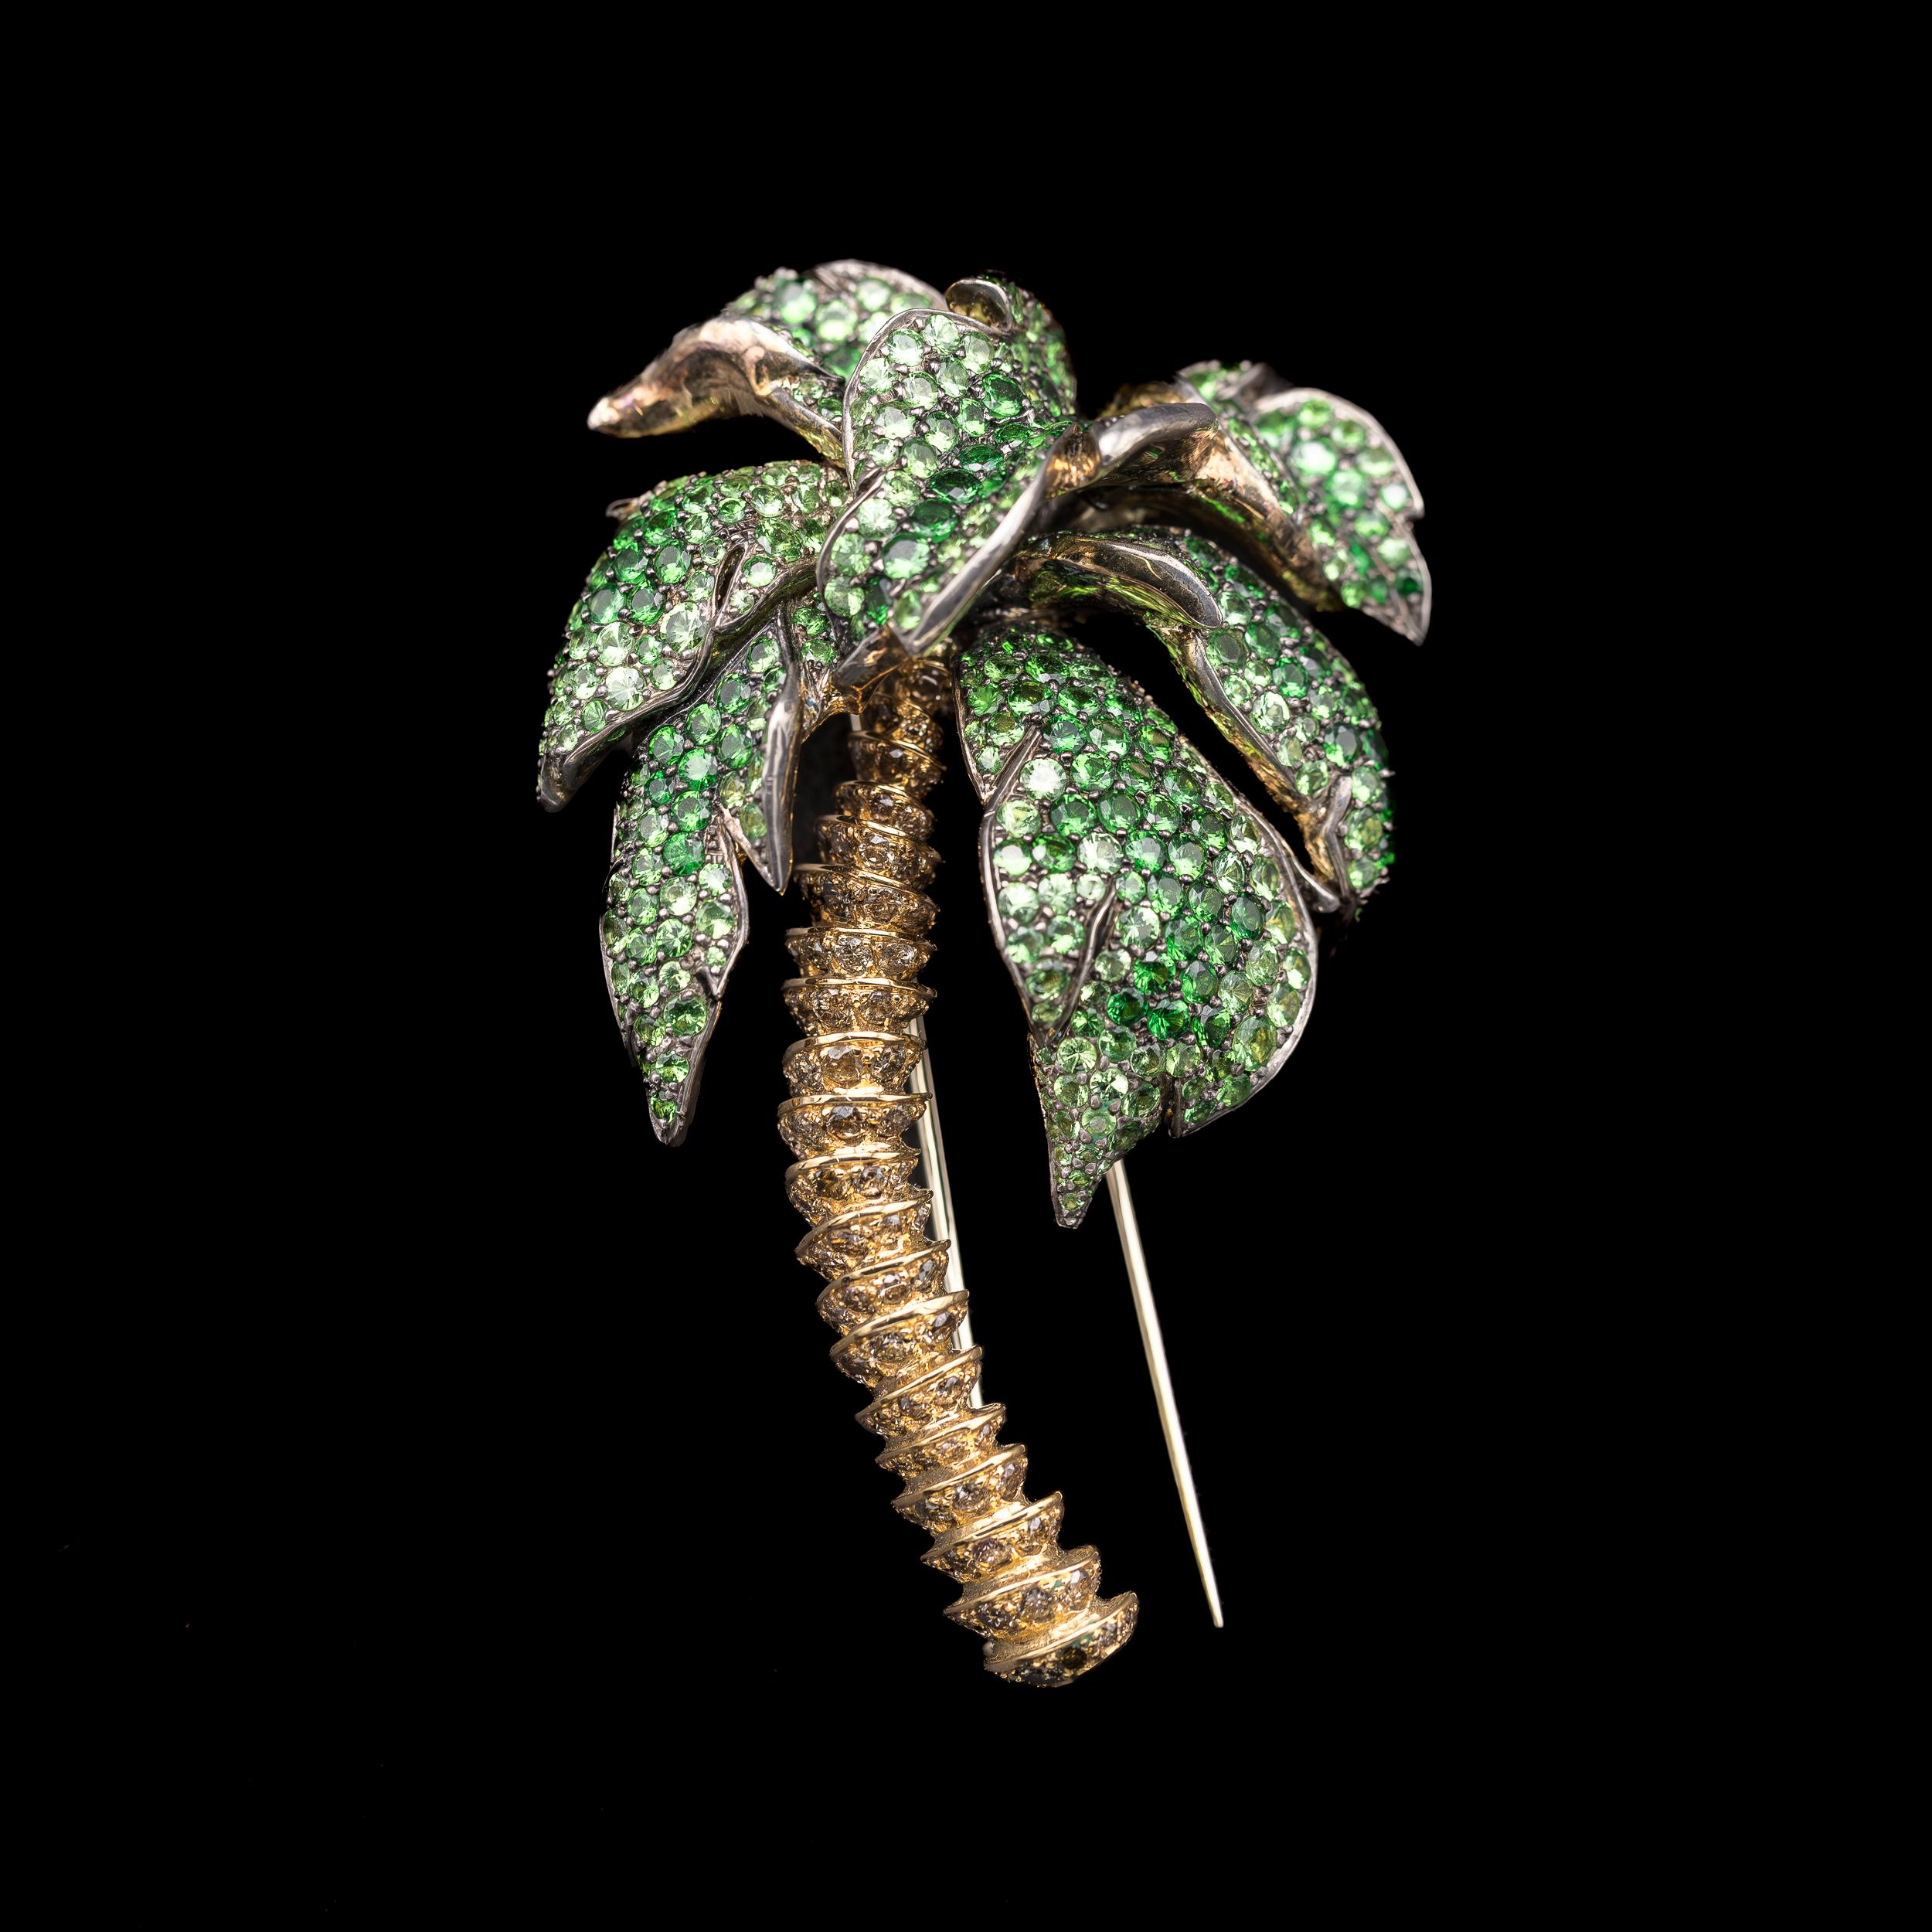 ANDRE MARCHA Palm green garnet and fancy colored yellow and brown diamond pin brooch in 18kt yellow gold and sterling silver, accompanied by maker’s travel pouch in gray suede, Lebanon, 2000s. From the Lebanese brand’s Naturalis collection and